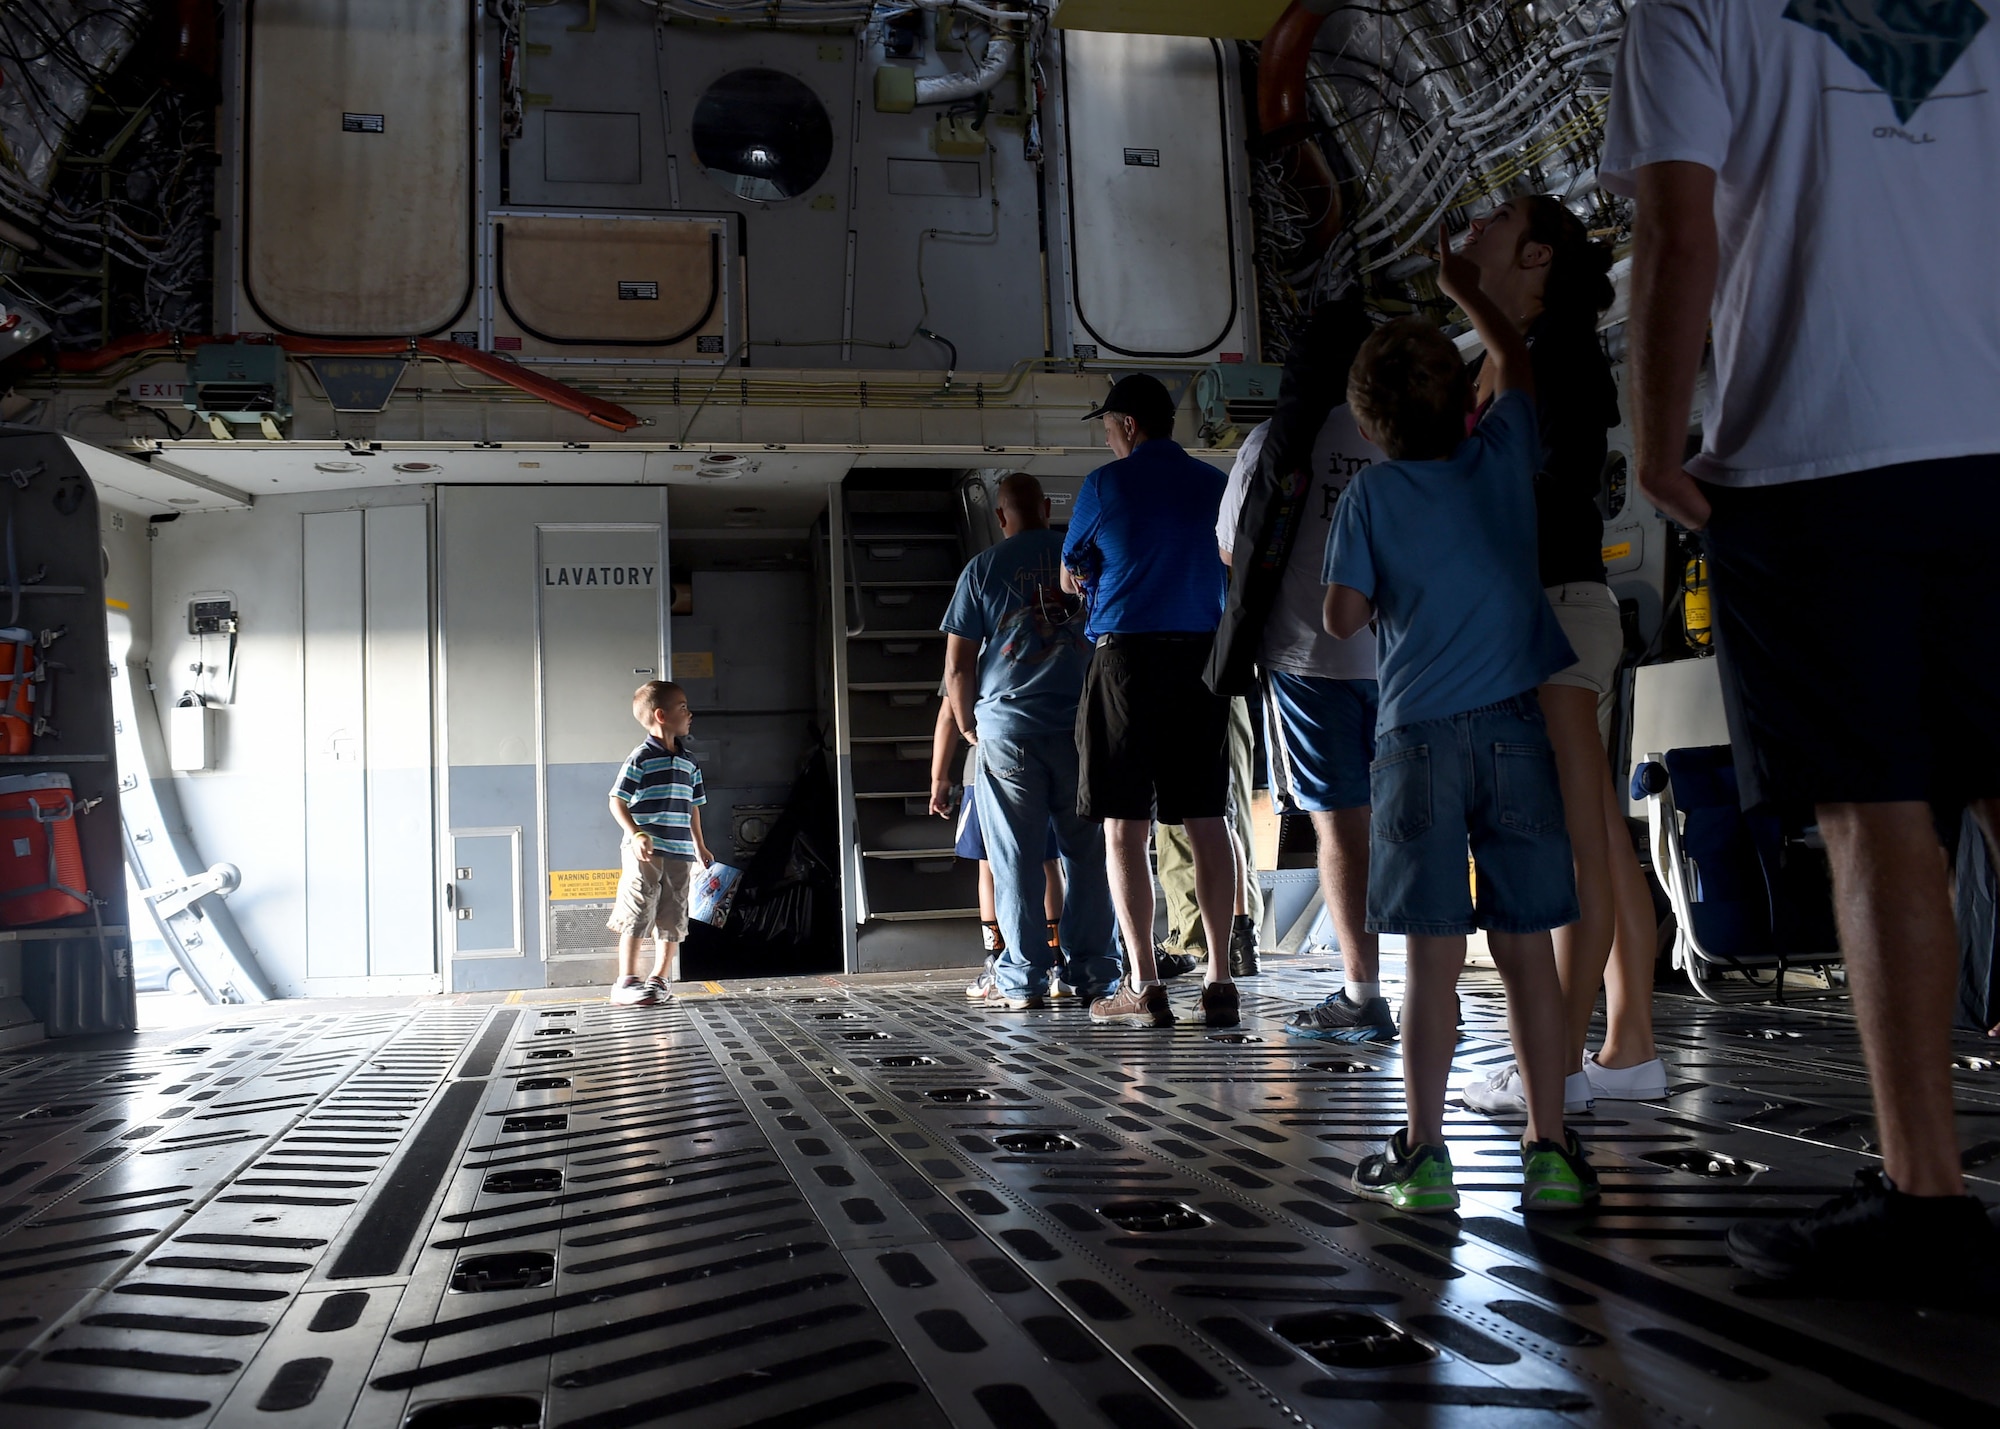 Air show attendees, wait in line to see the flight deck of a U.S. Air Force C-17 Globemaster III cargo aircraft, assigned to the 97th Air Mobility Wing, during the 2016 Stuart Air Show, Nov. 5, 2016 at Stuart, Florida. The C-17 was set up as a static display during the air show to help educate attendees about its capabilities and the 97th AMW training mission. (U.S. Air Force photo by Senior Airman Franklin R. Ramos/Released)